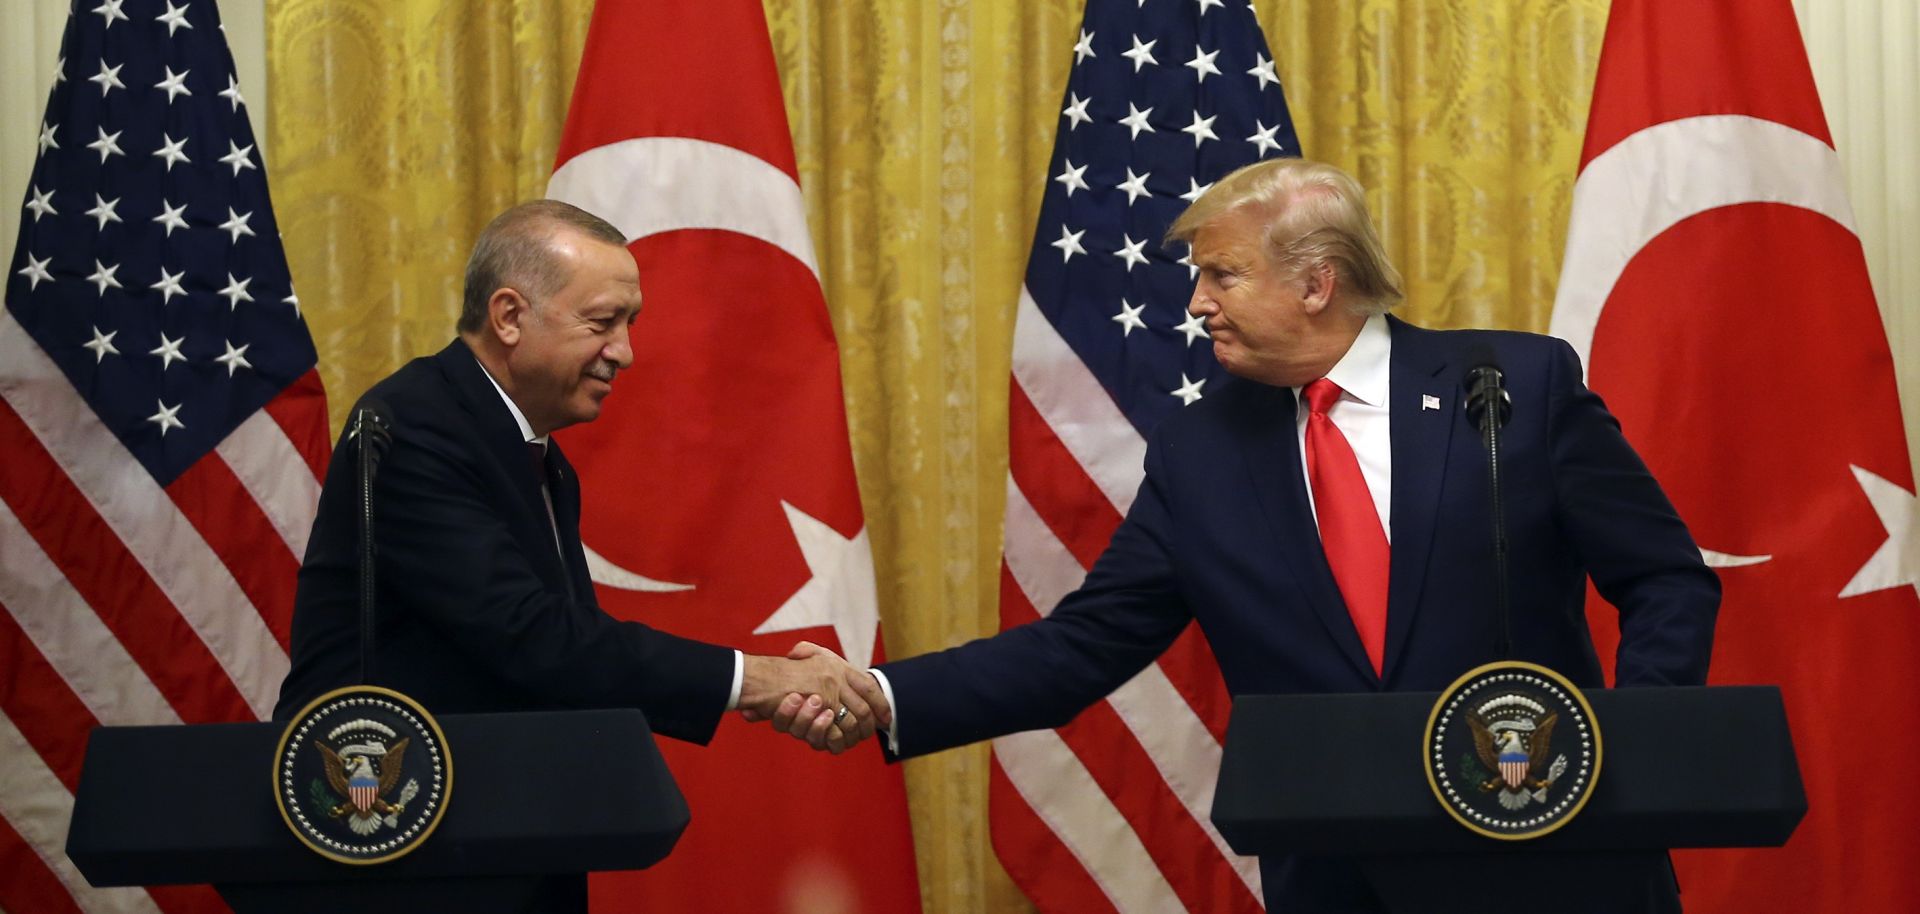 Turkish President Recep Tayyip Erdogan and U.S. President Donald Trump hold a news conference at the White House on Nov. 13, 2019.